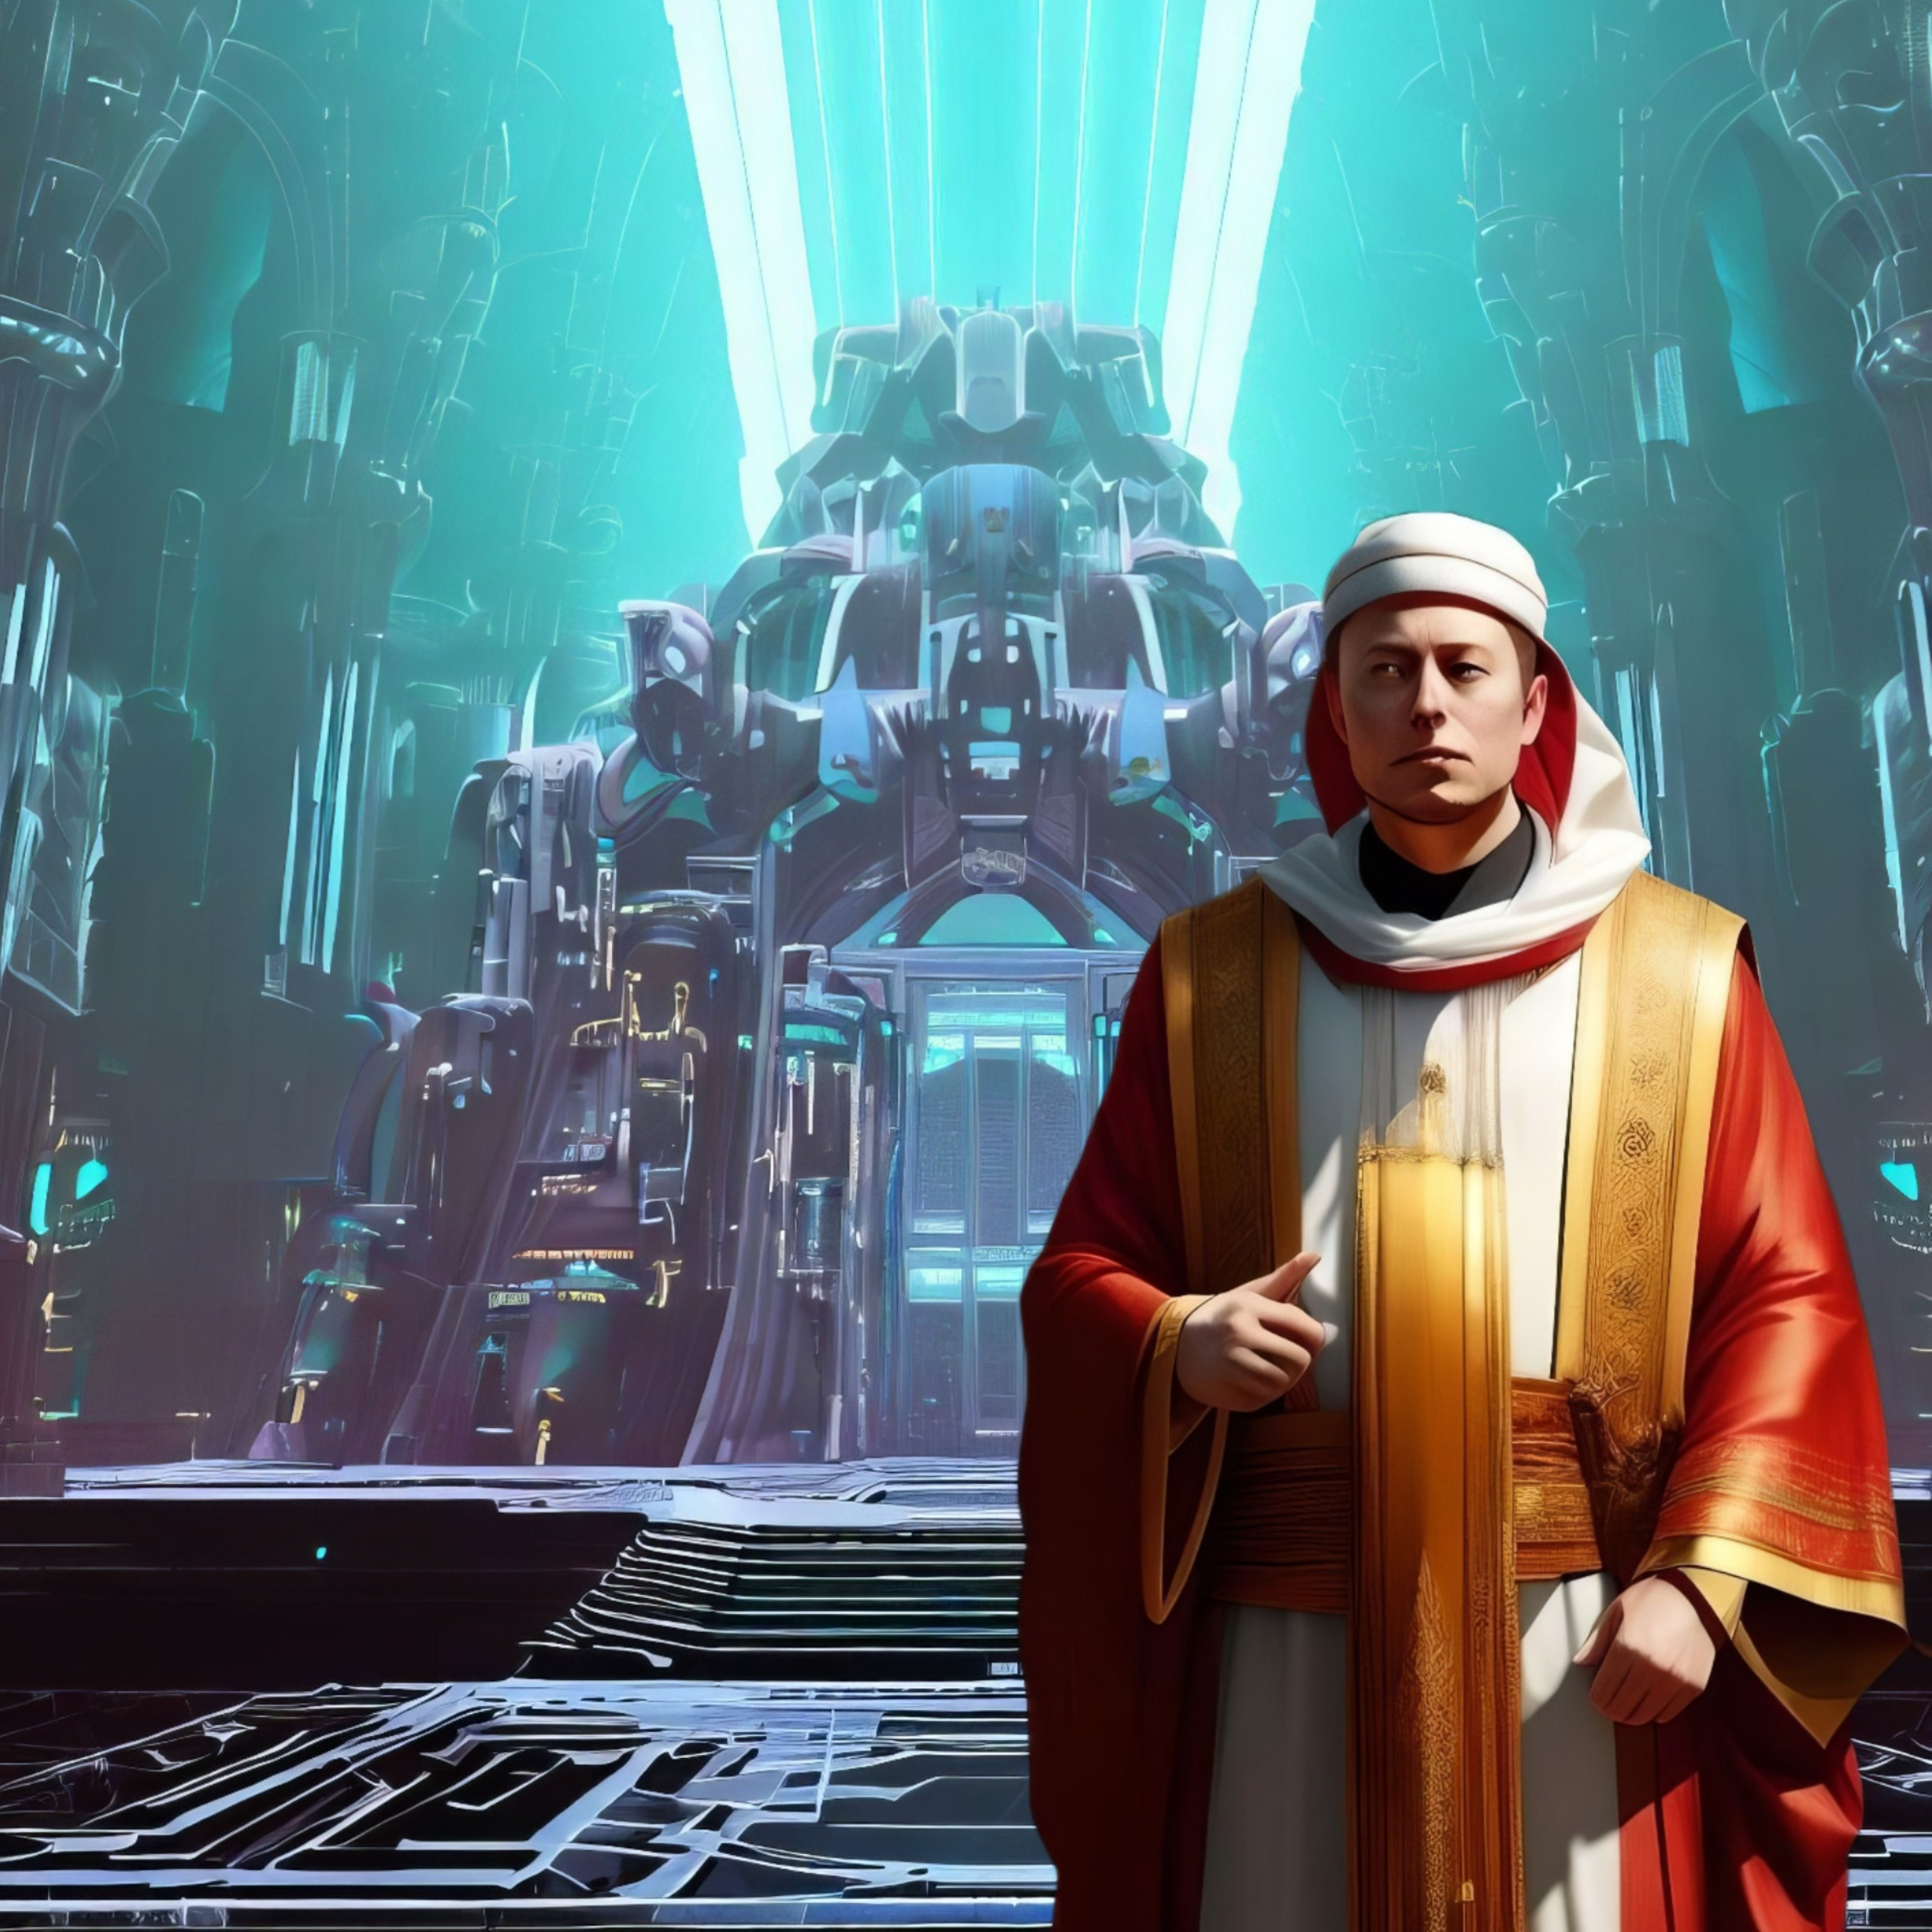 Elon Musk dressed in ambiguous religious garb in front of a cyber temple.